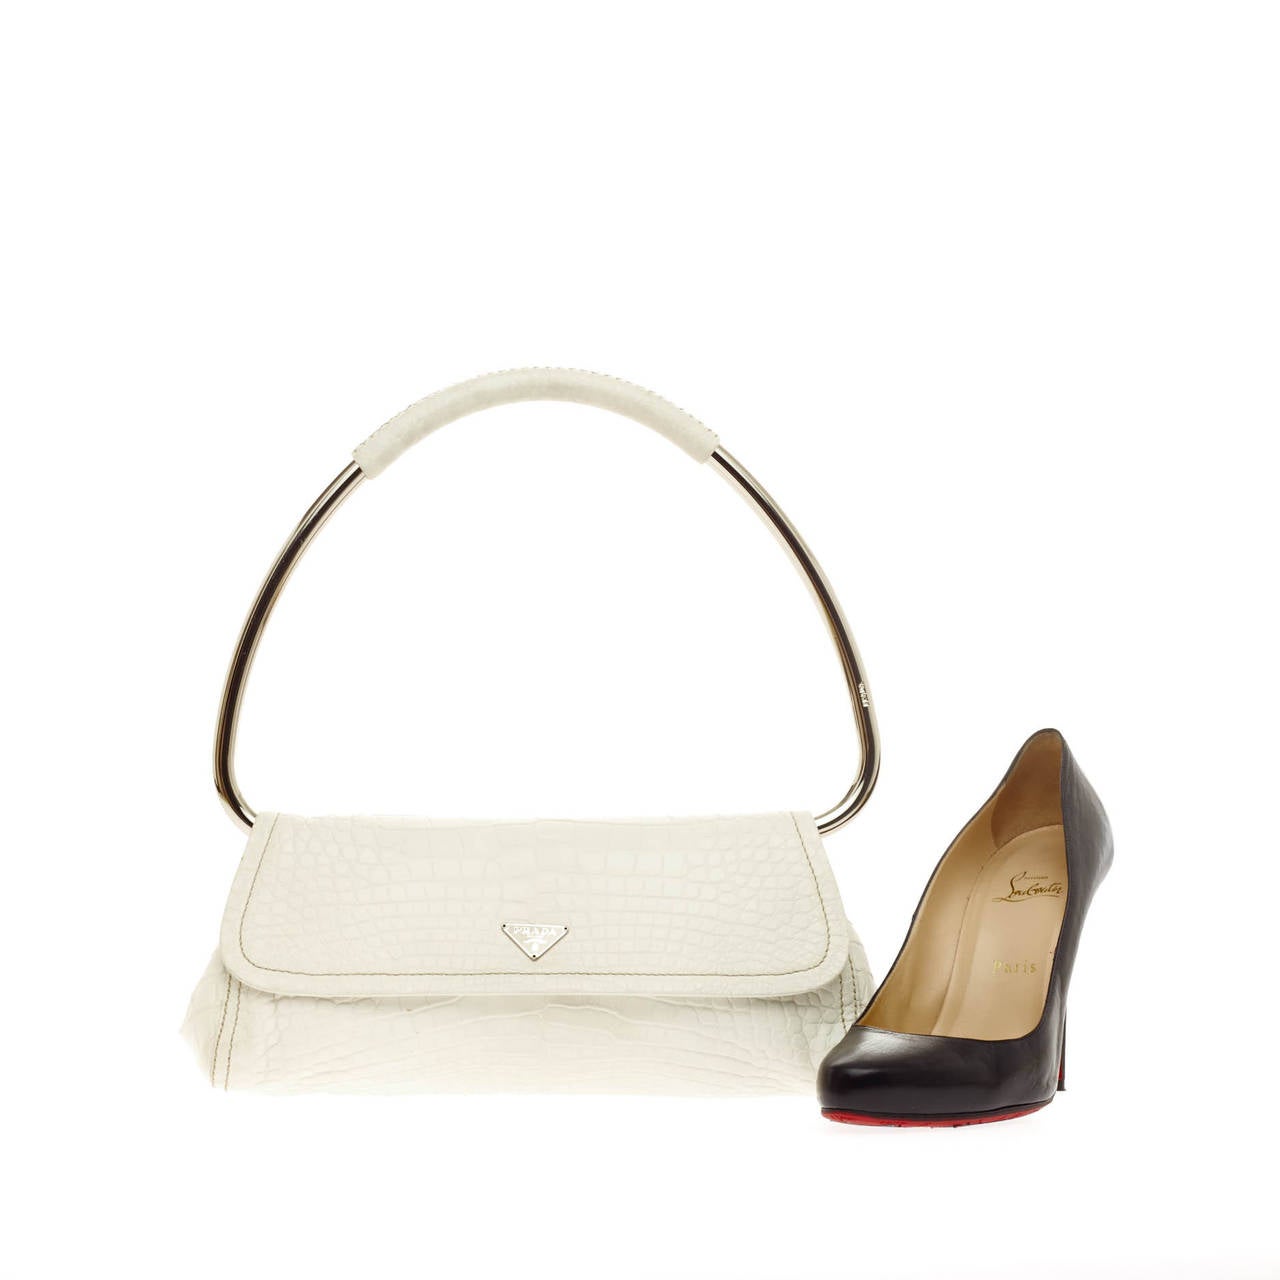 This authentic Prada Ring Handle Bag Crocodile is simple yet stylish for everyday use. Created from genuine white crocodile skin, this luxuriously minimalist handle bag features a unique silver looped ring handle, side silver snaps and iconic Prada